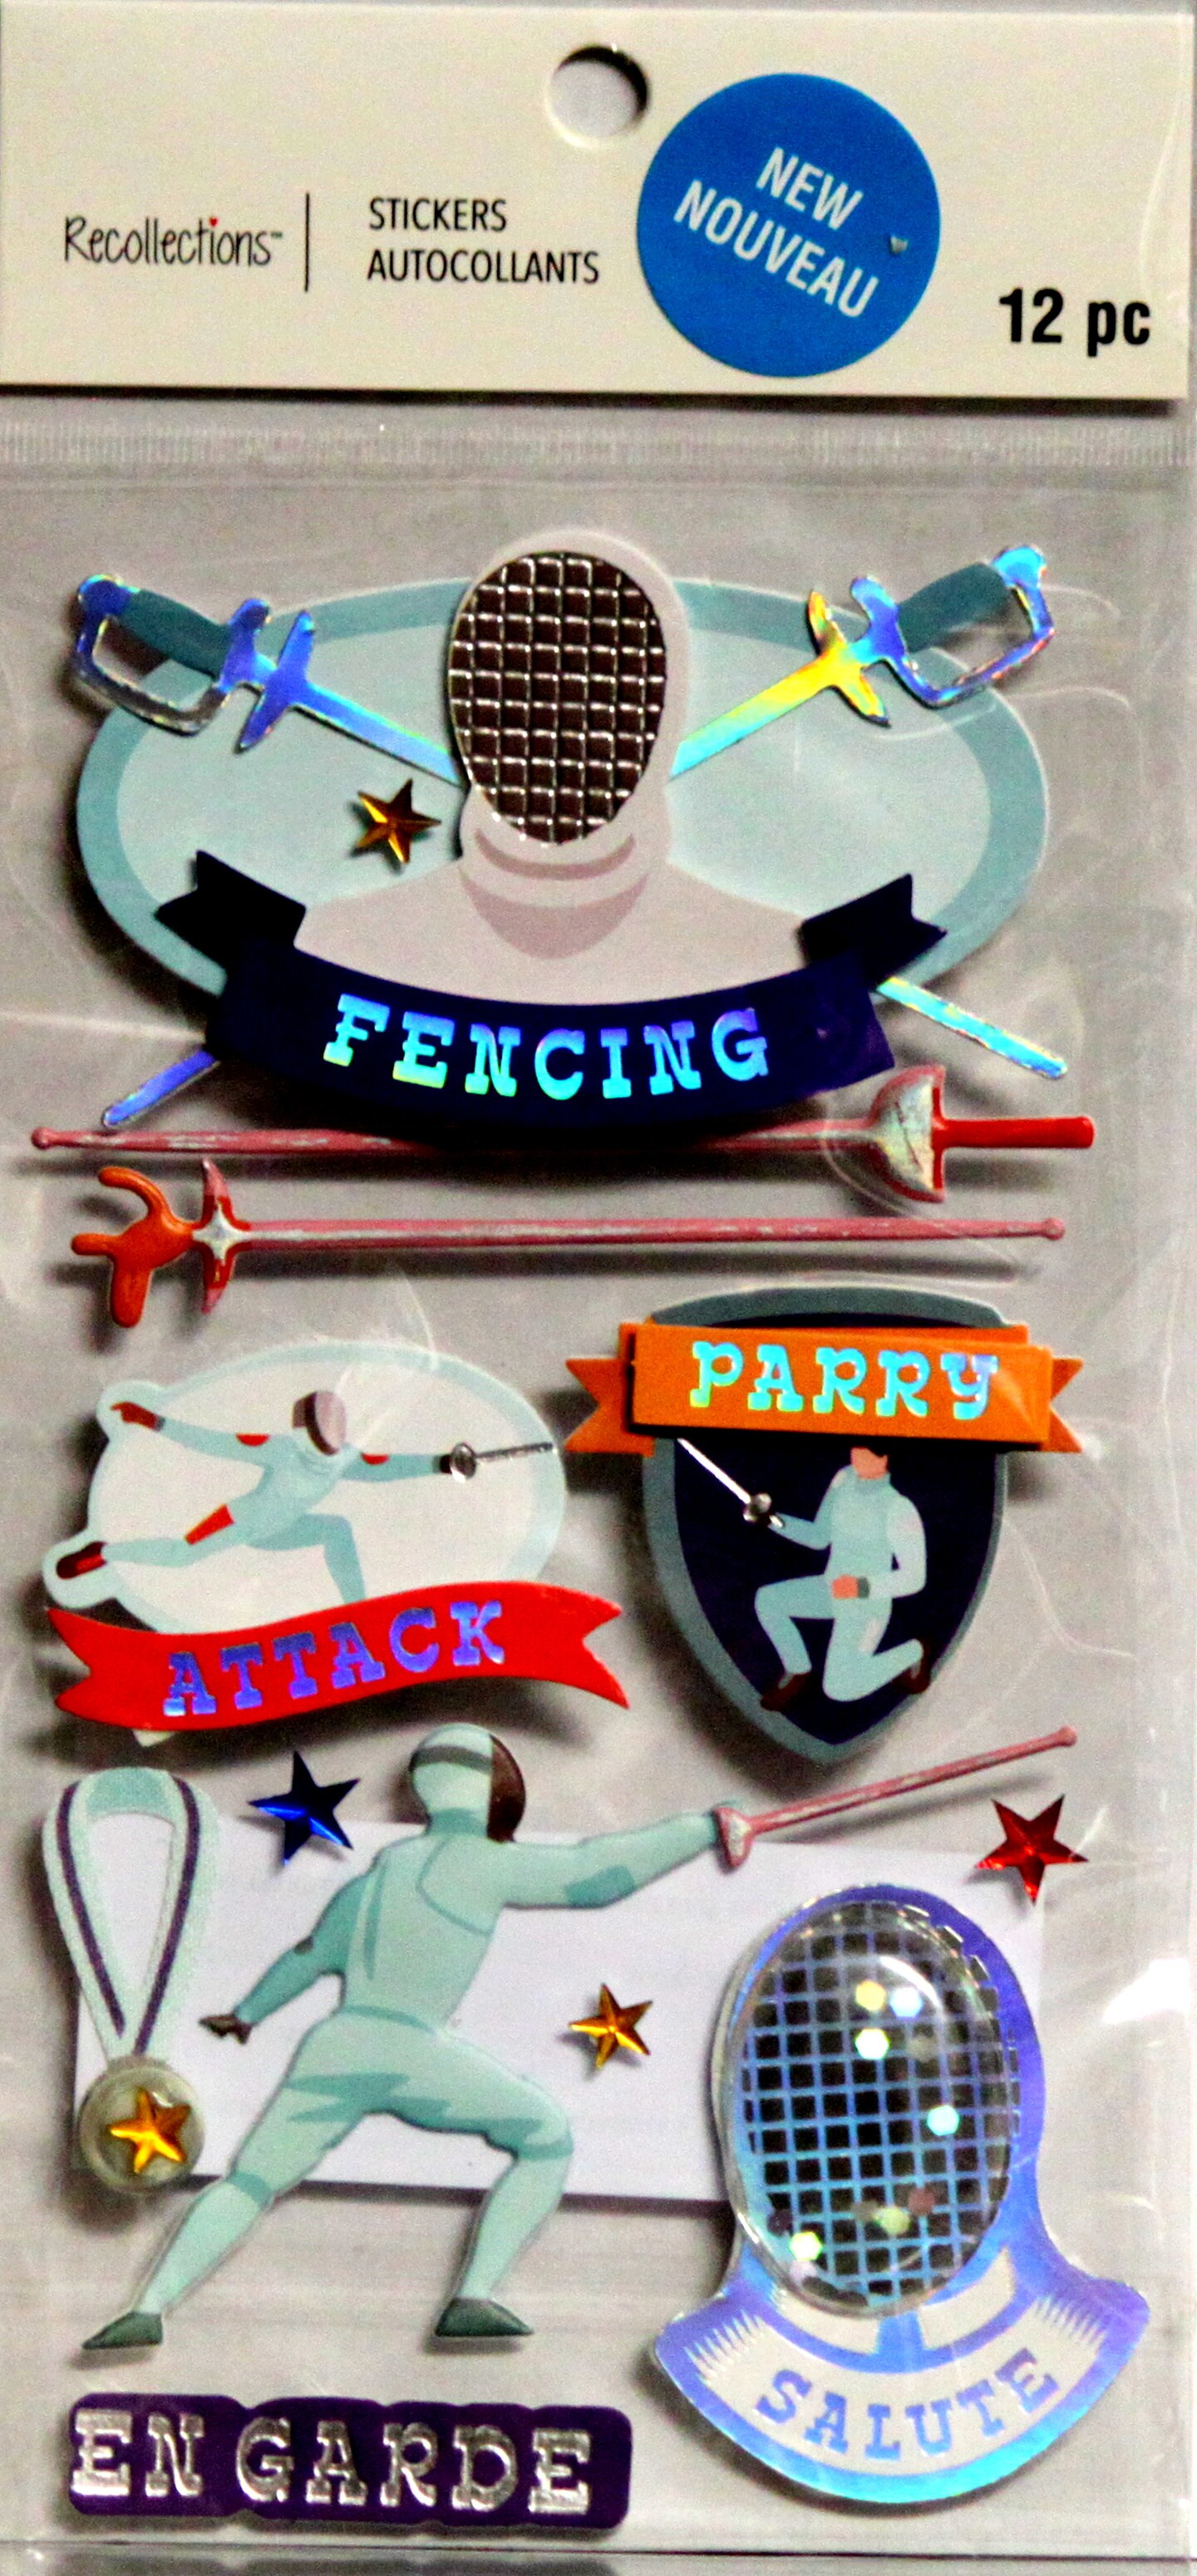 Recollections Fencing Dimensional Stickers